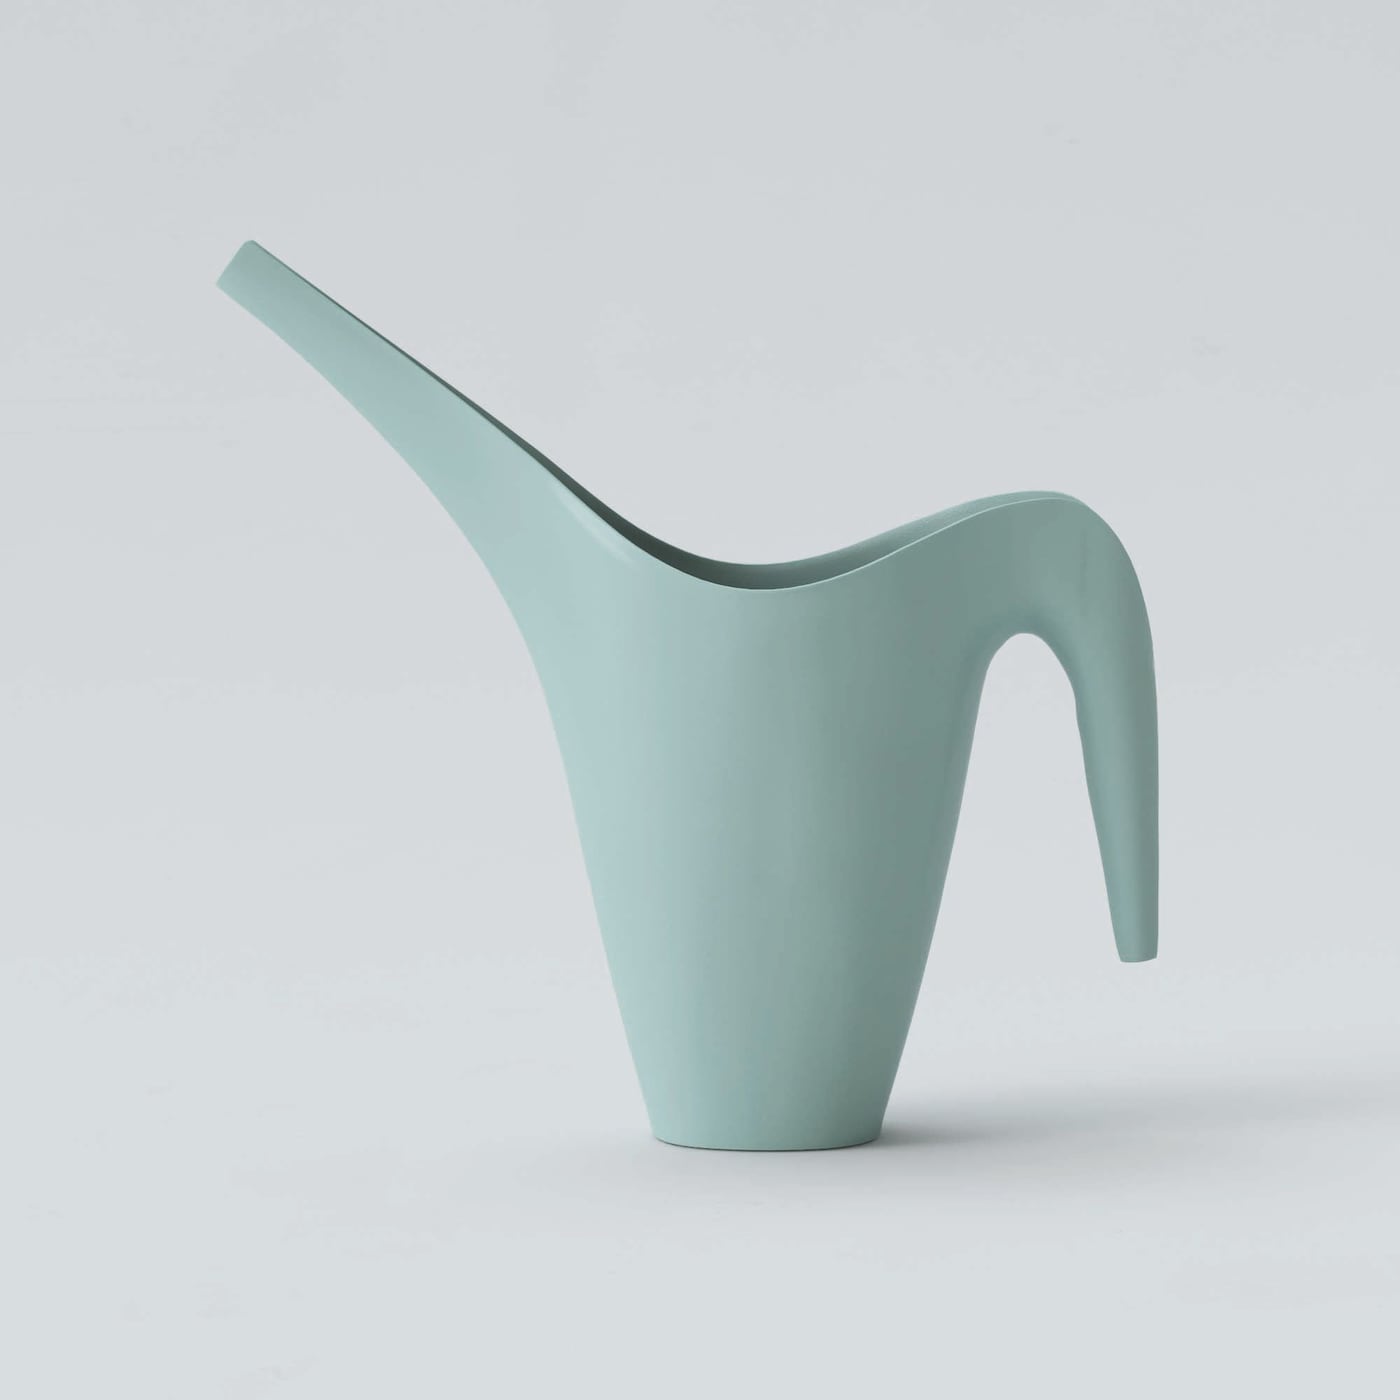 A light blue IKEA PS watering can.